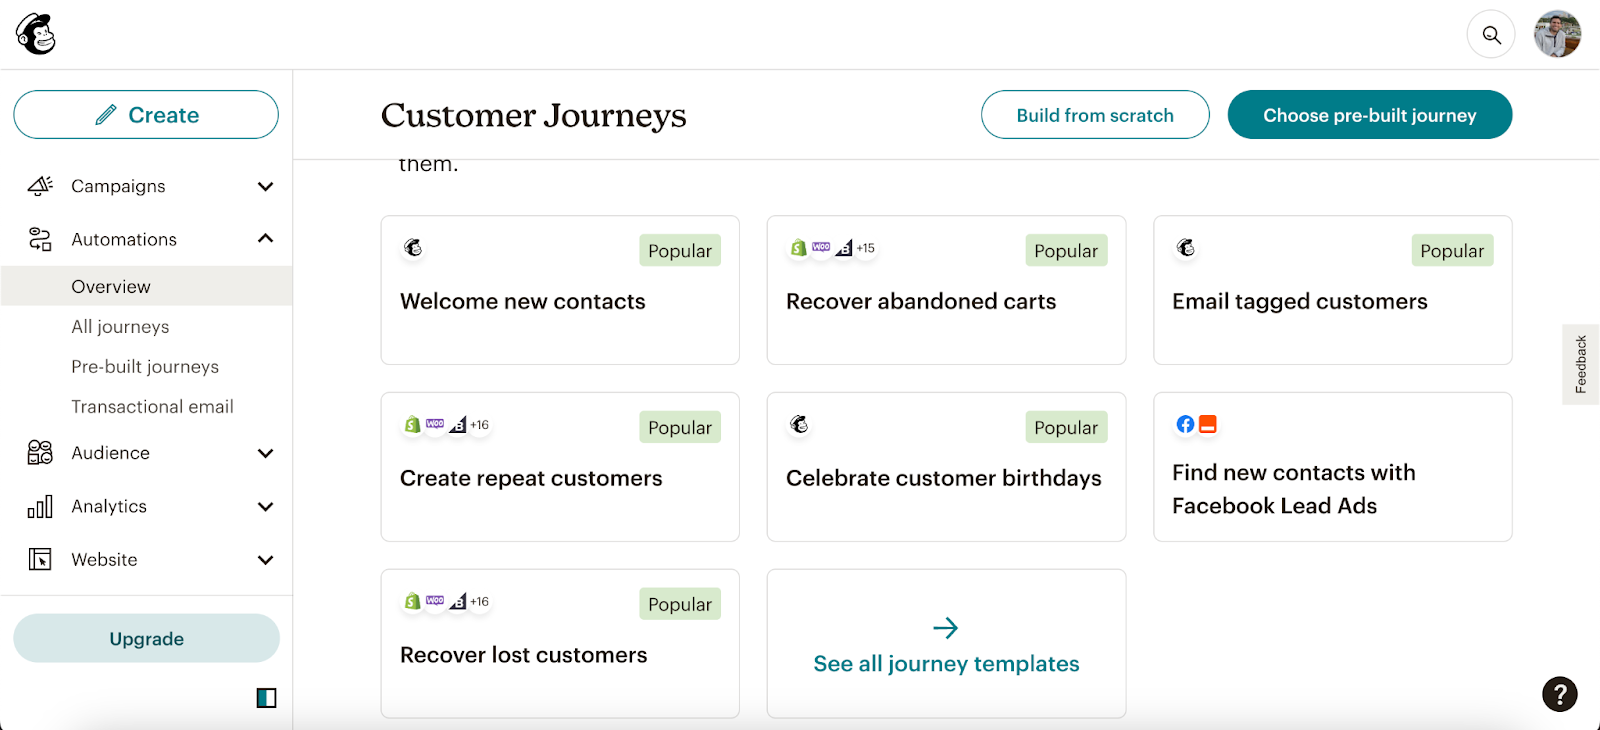 Mailchimp allows marketers to easily create different customer journeys